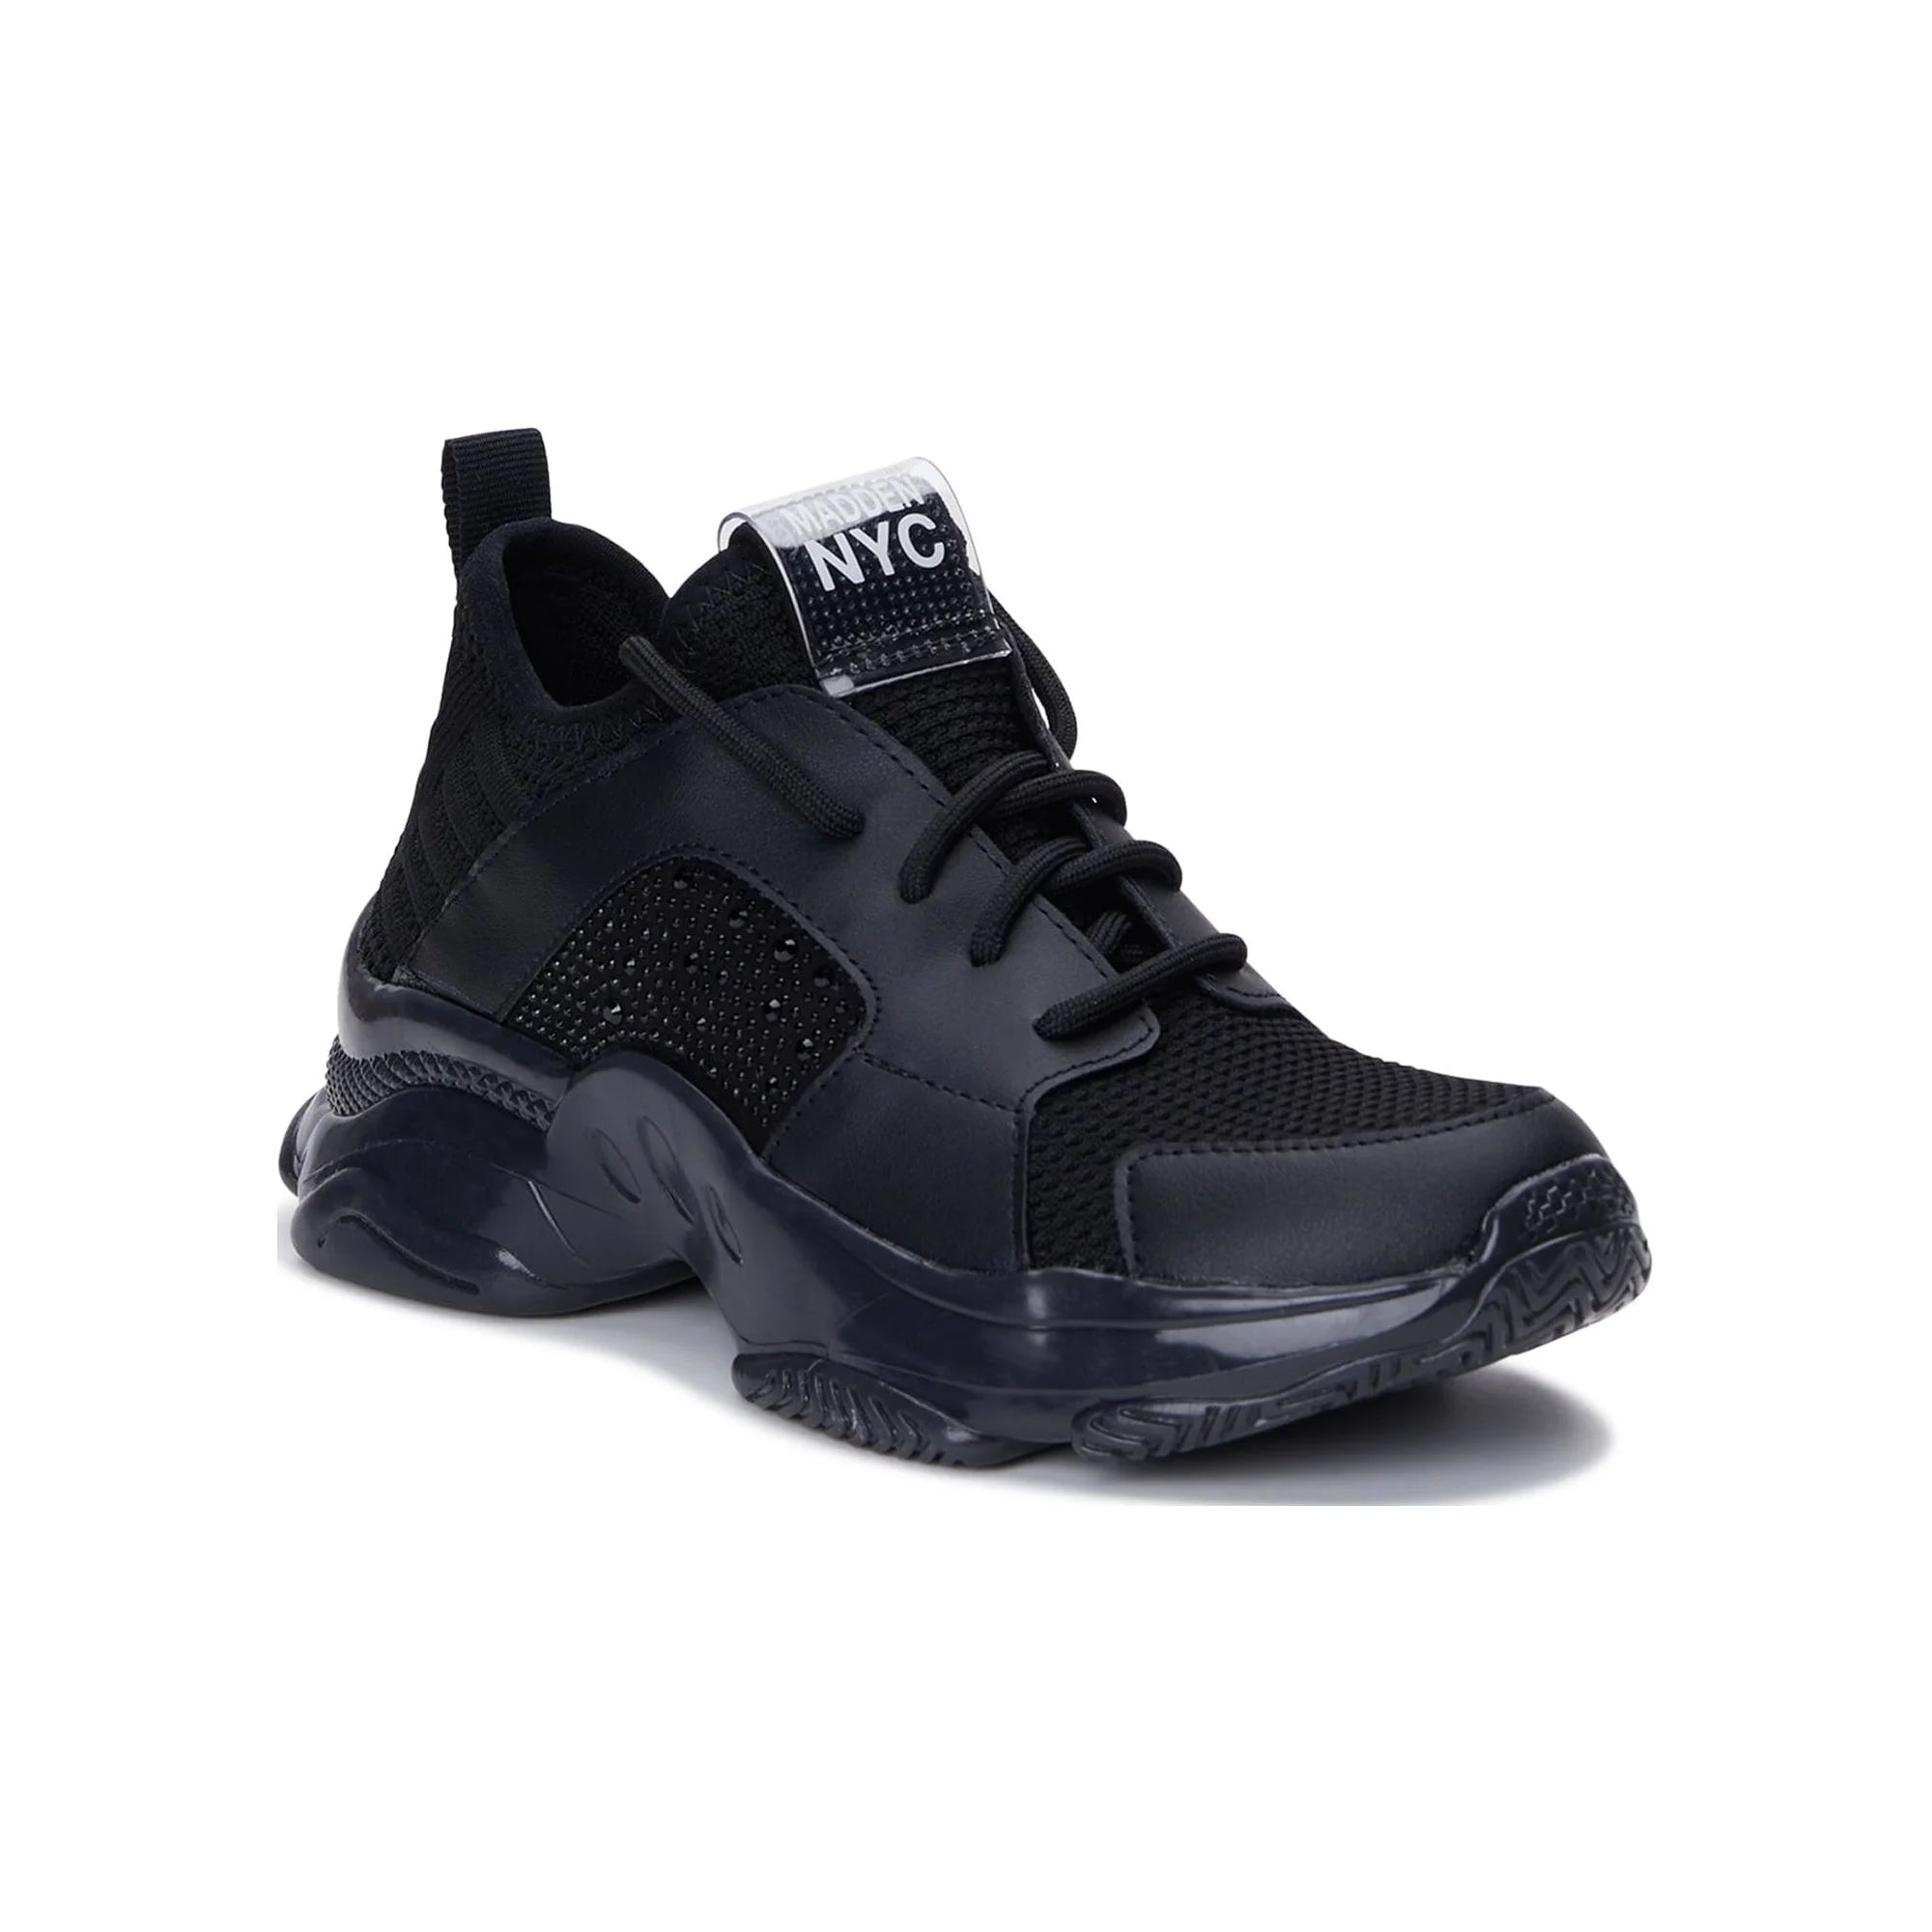 MADDEN NYC EMBELLISHED SNEAKERS IN BLACK